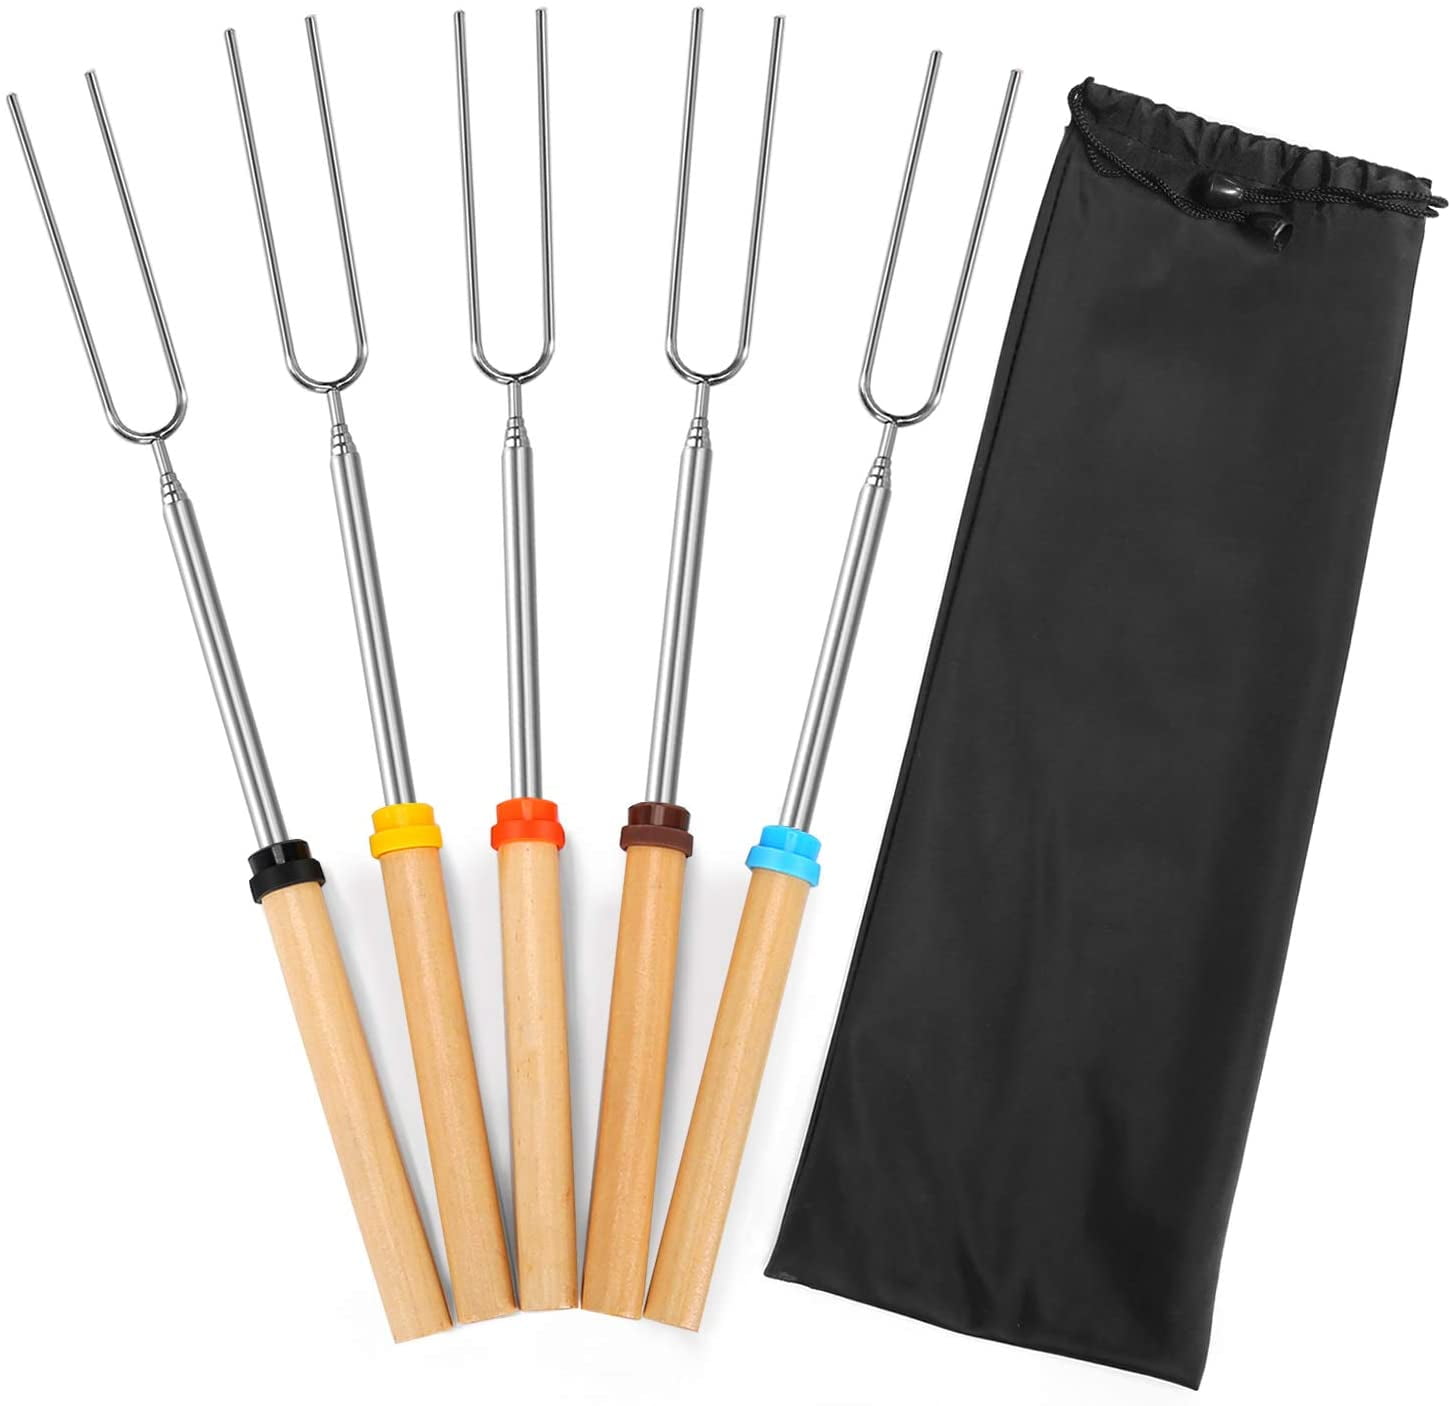 N\A Marshmallow Roasting Sticks 32 inch 8 Pcs Smores Skewers Barbecue Extendable Forks with Portable Bag Hot Dog Roasting Sticks for Campfire Camping Bonfire and Grill 